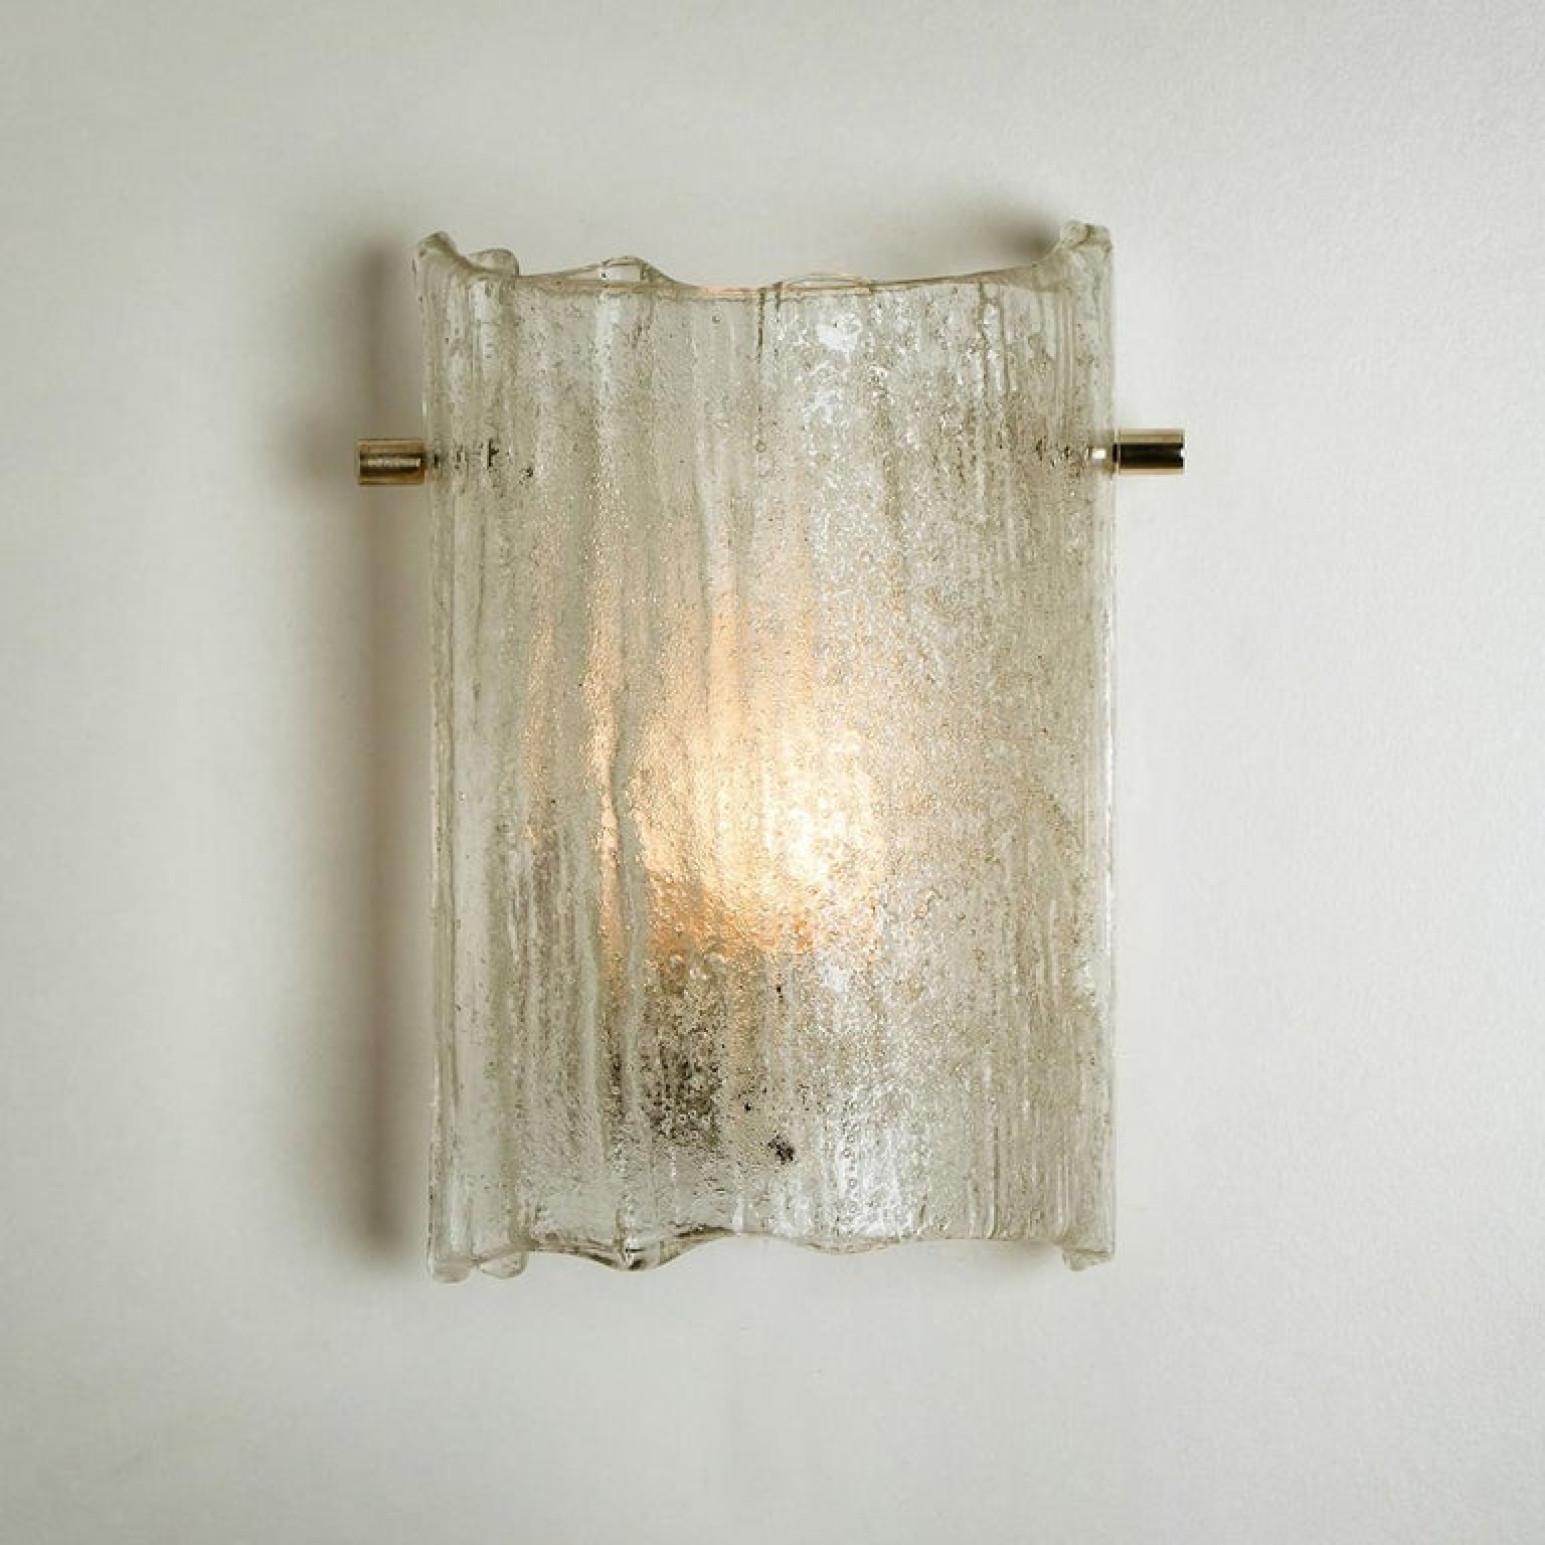 Austrian 1 of the 10 Massive Glass Wall Light Fixtures by J.T. Kalmar, 1960 For Sale